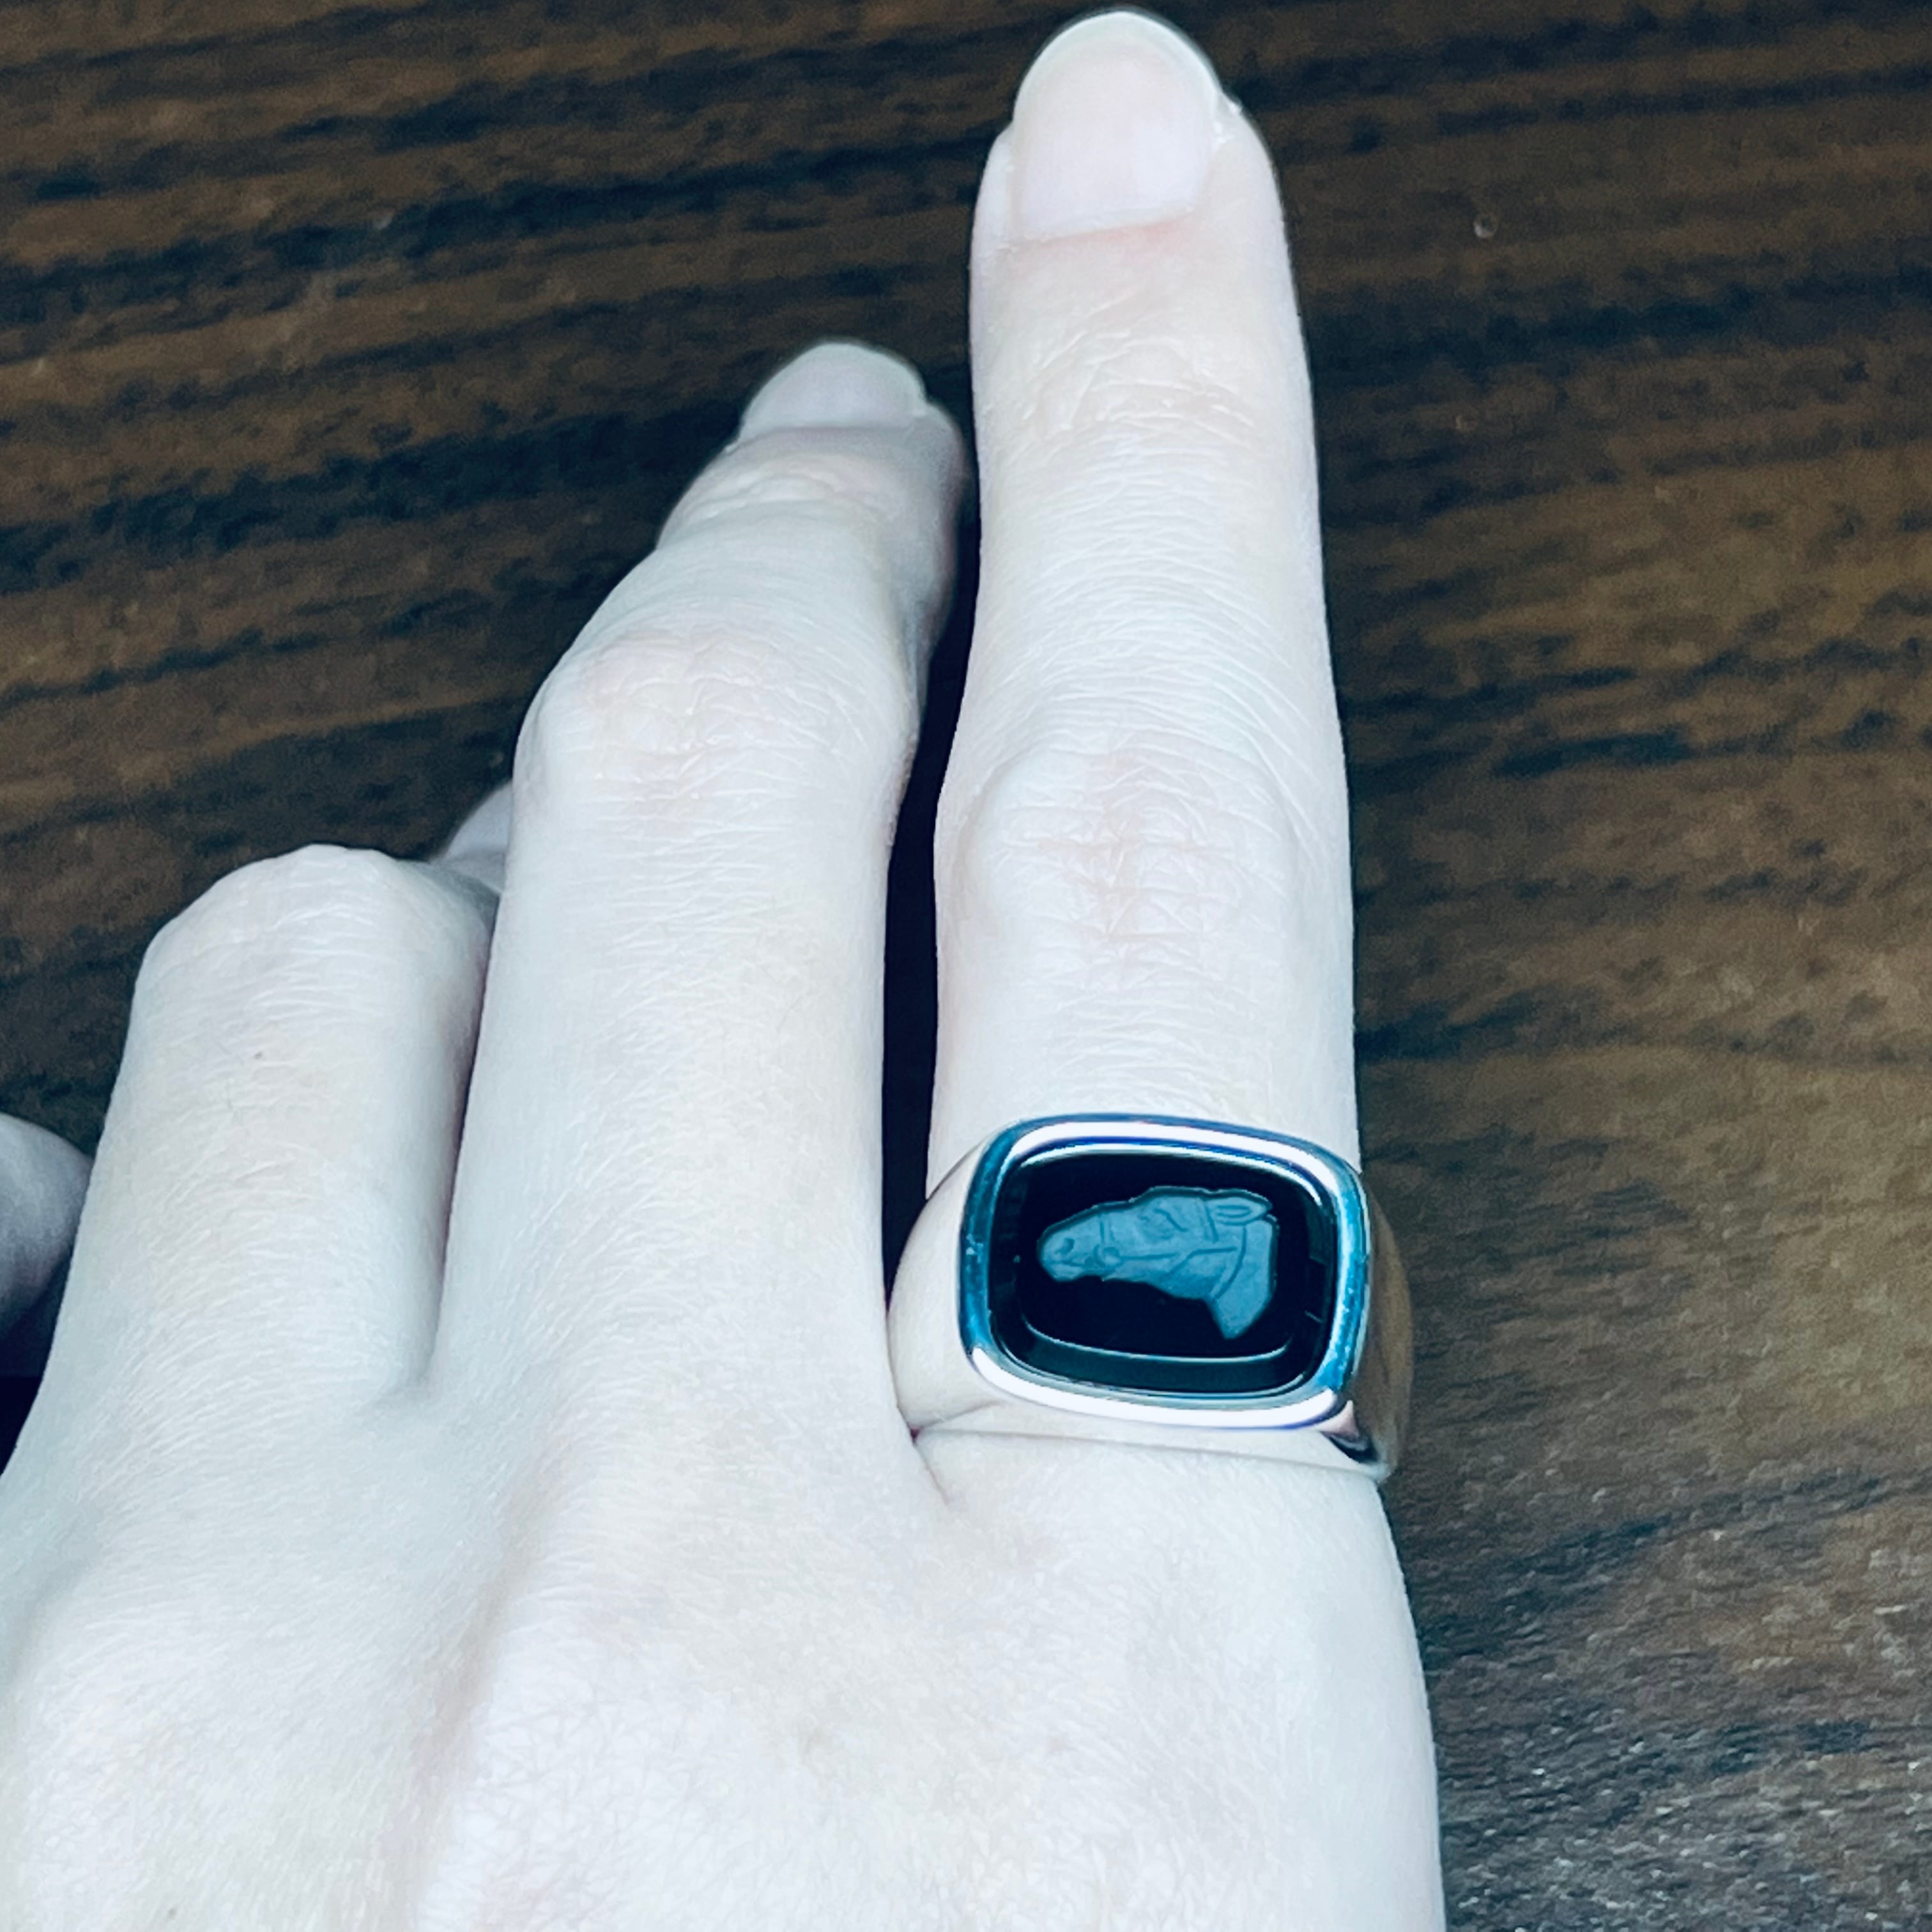 HERMES Chevauchée Black Onyx Ring Sterling Silver | エルメス 